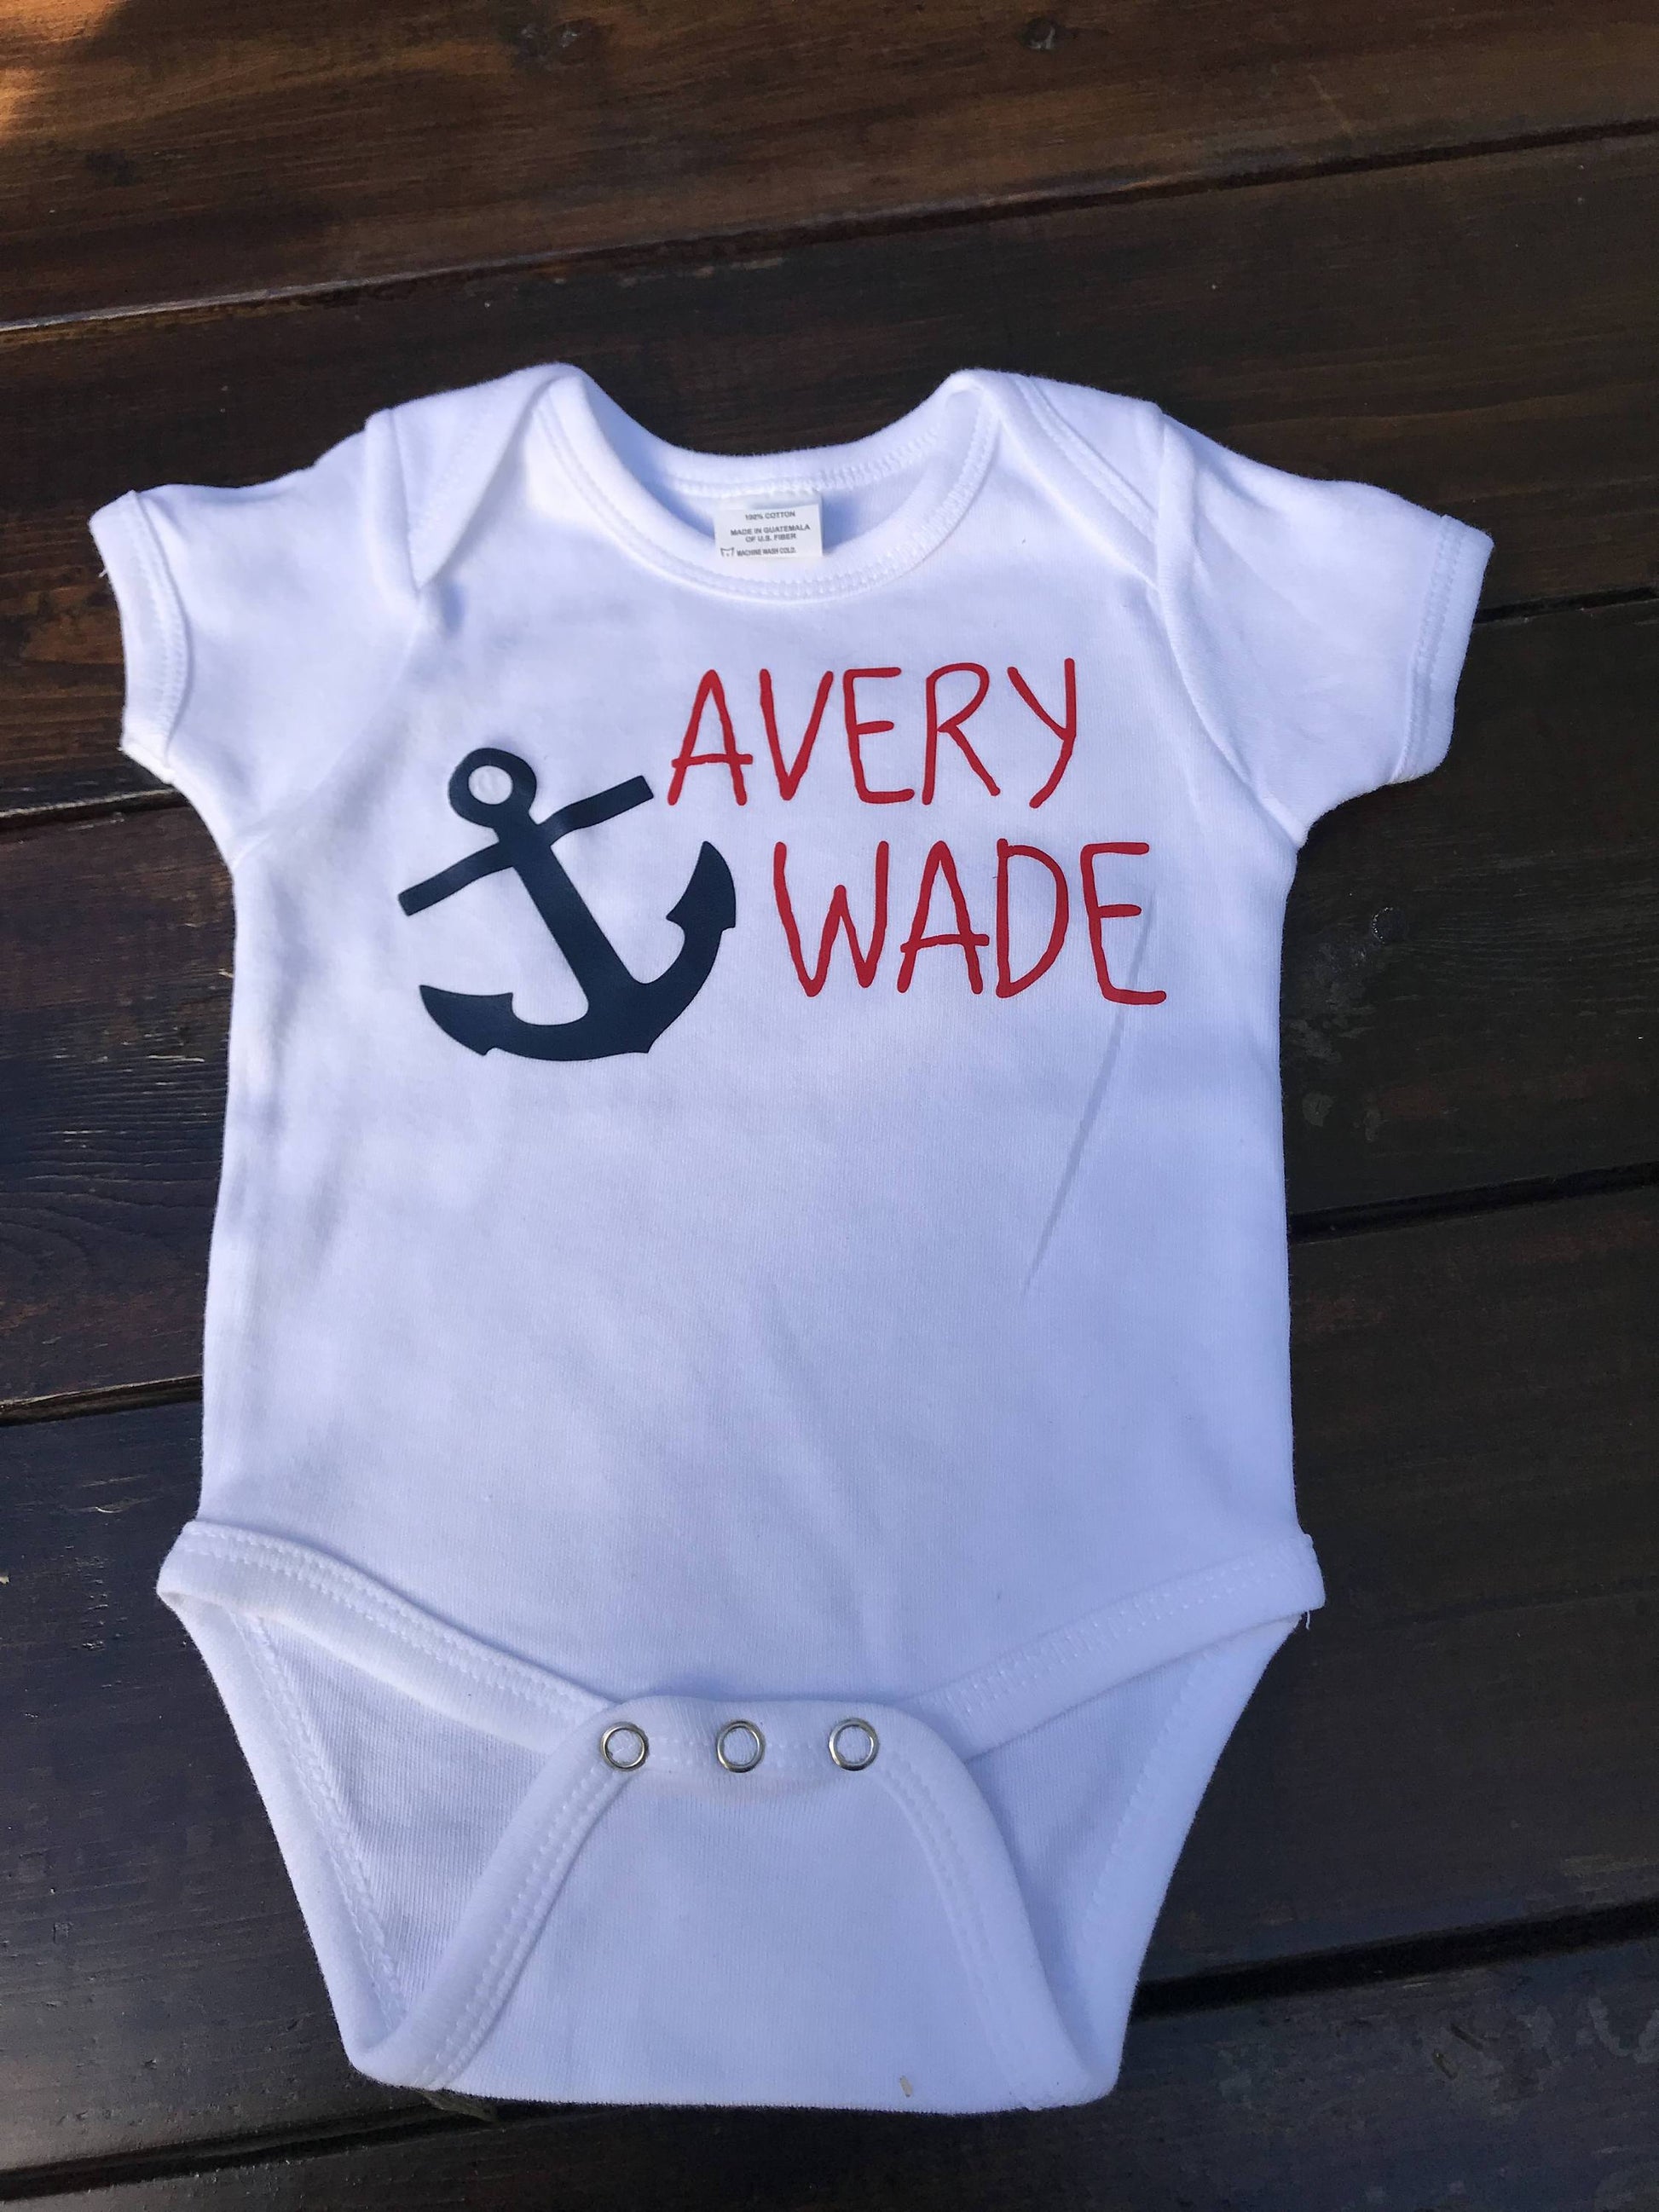 Handcrafted Children's Clothing, Clothing for Children and Parents, Nautical Birth Announcement-Baby Name Shirt, chi-fashionista